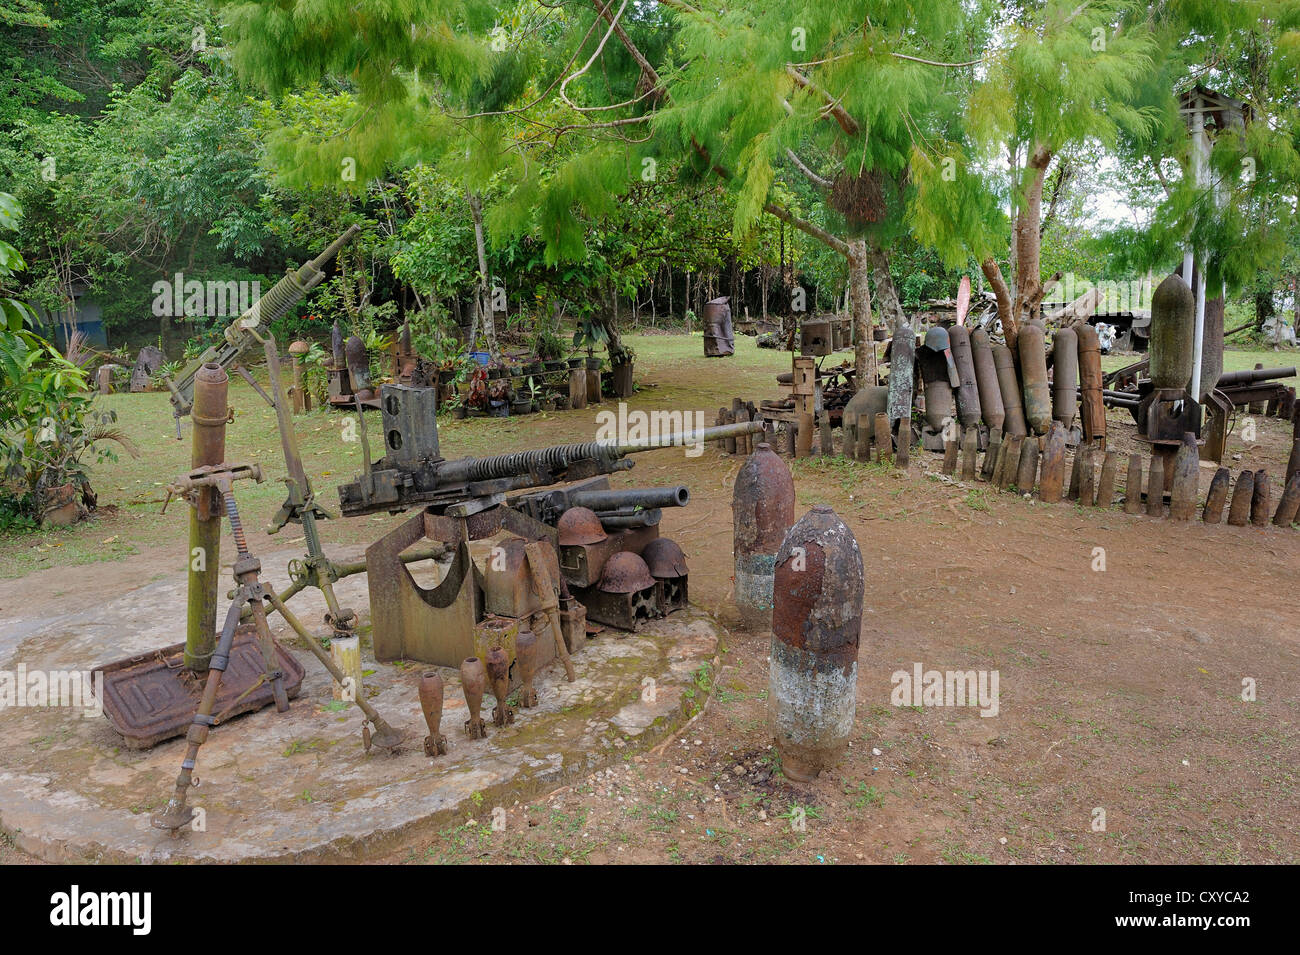 Weapons and ammunition from World War II, Pacific War, with relics from the region, Battle of Biak, Pacific War Museum near Kota Stock Photo